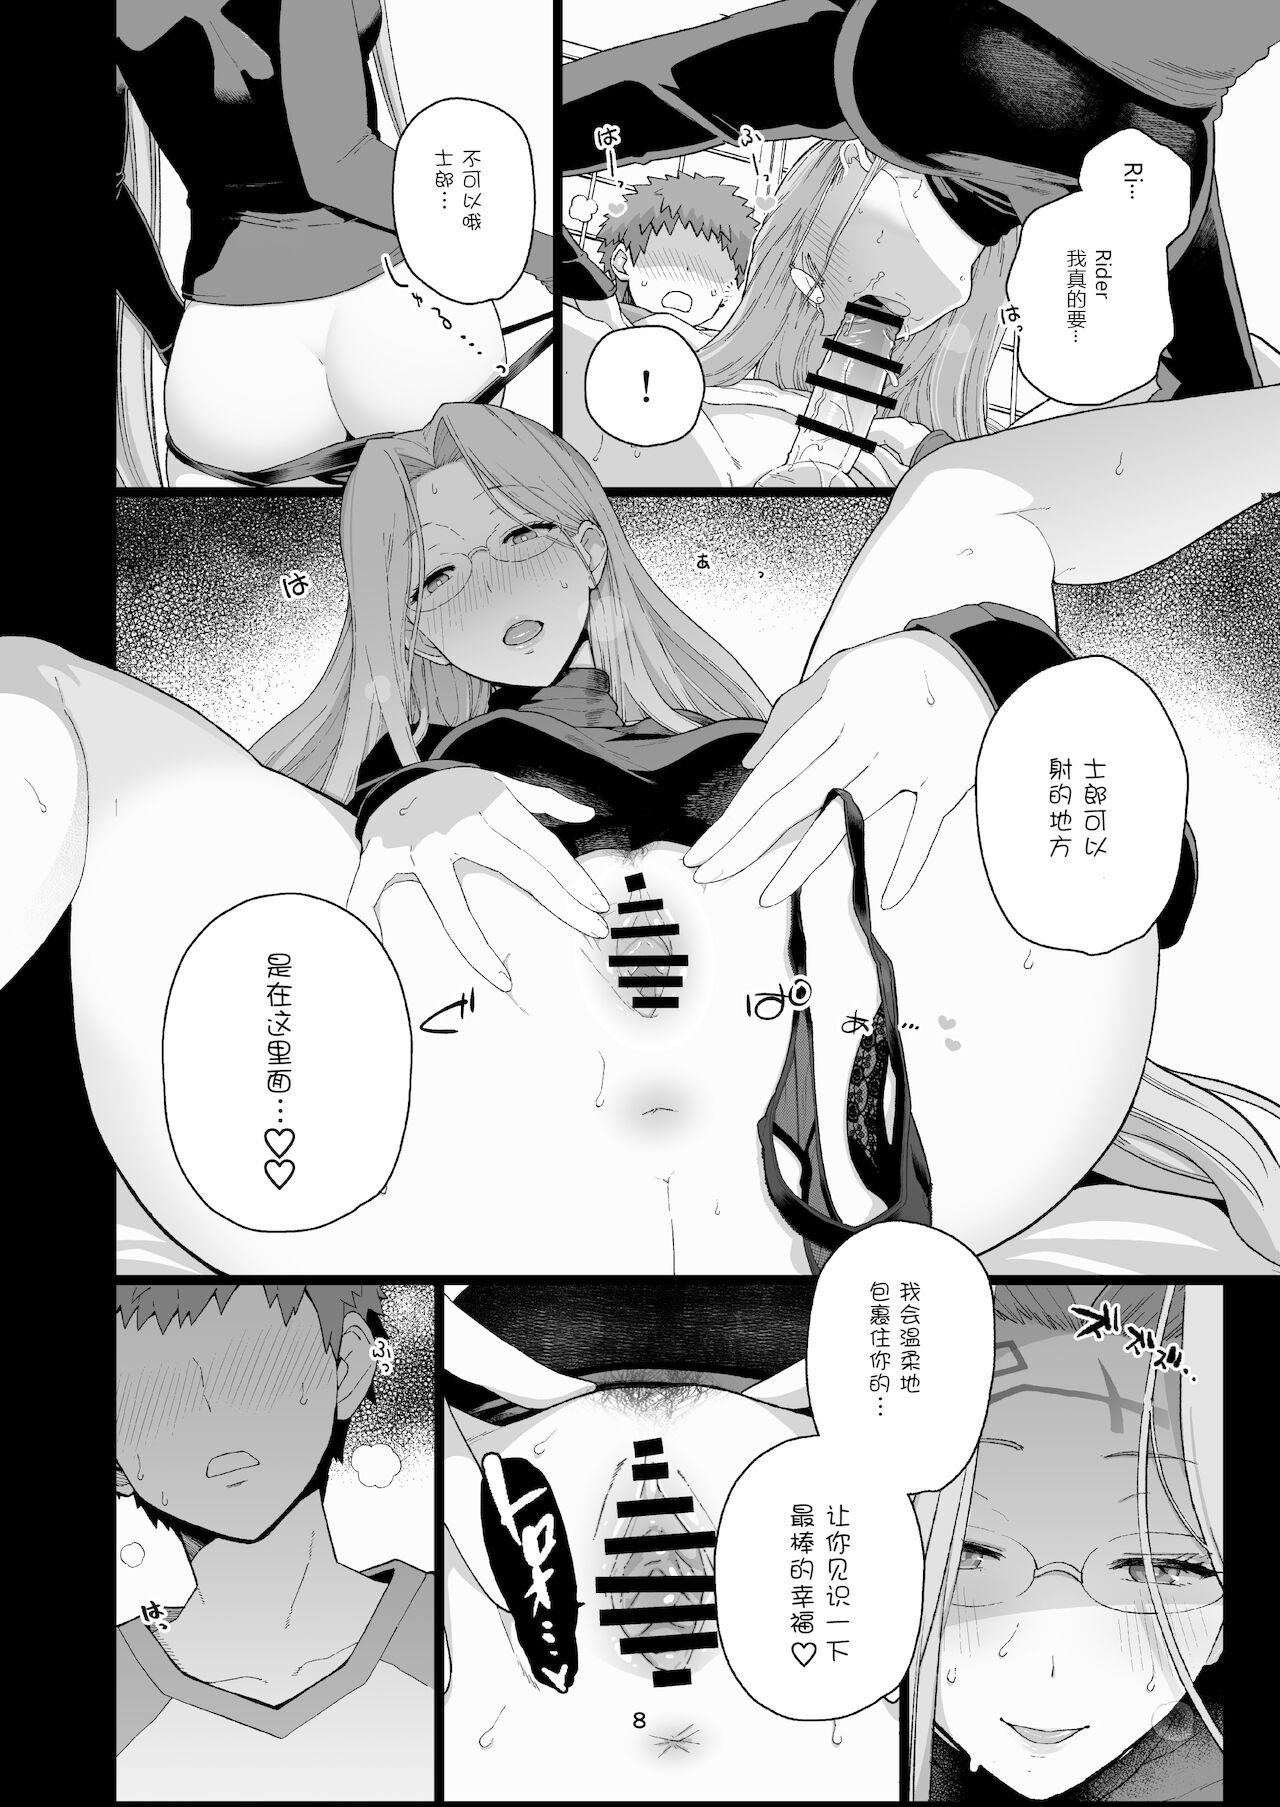 Youth Porn Rider-san no Tsumamigui - Fate stay night Cumming - Page 10